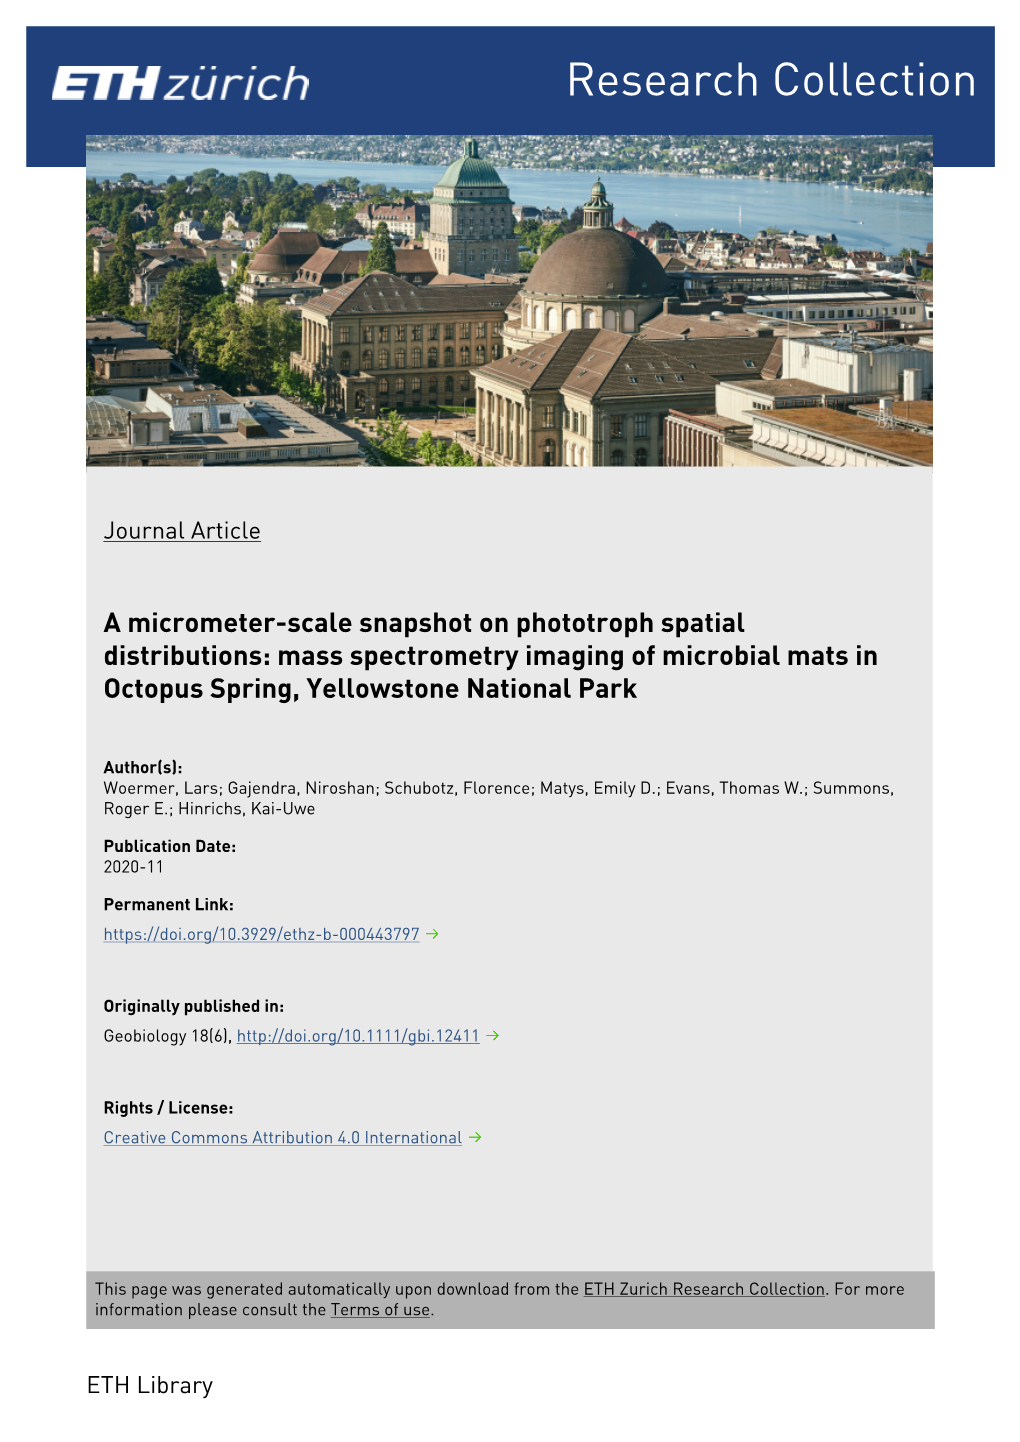 Mass Spectrometry Imaging of Microbial Mats in Octopus Spring, Yellowstone National Park